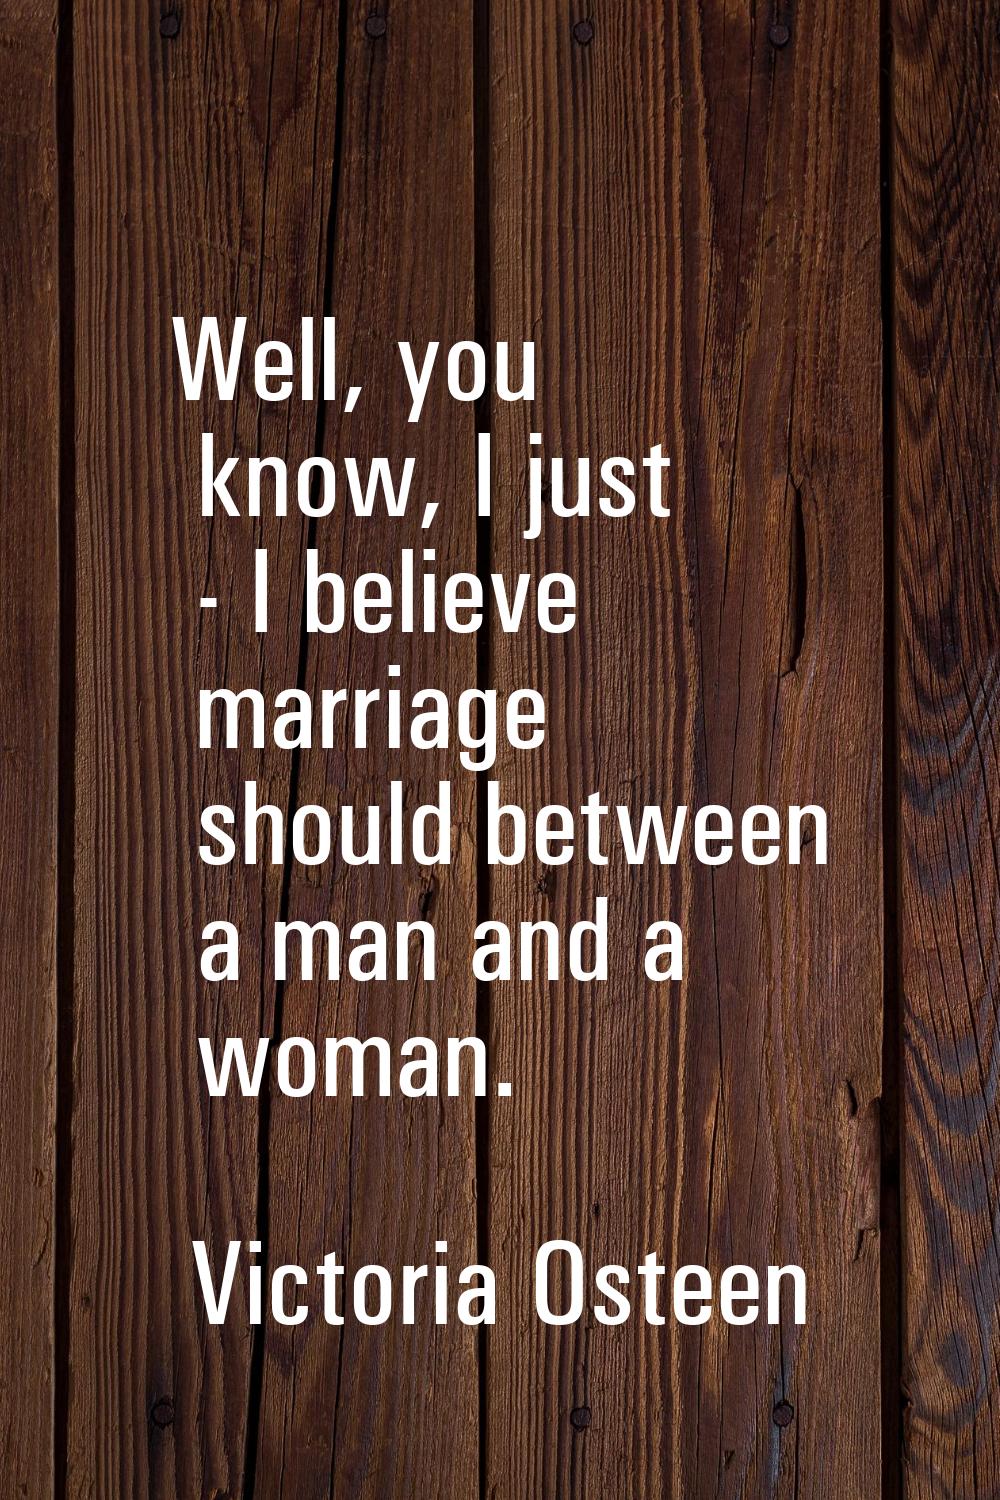 Well, you know, I just - I believe marriage should between a man and a woman.